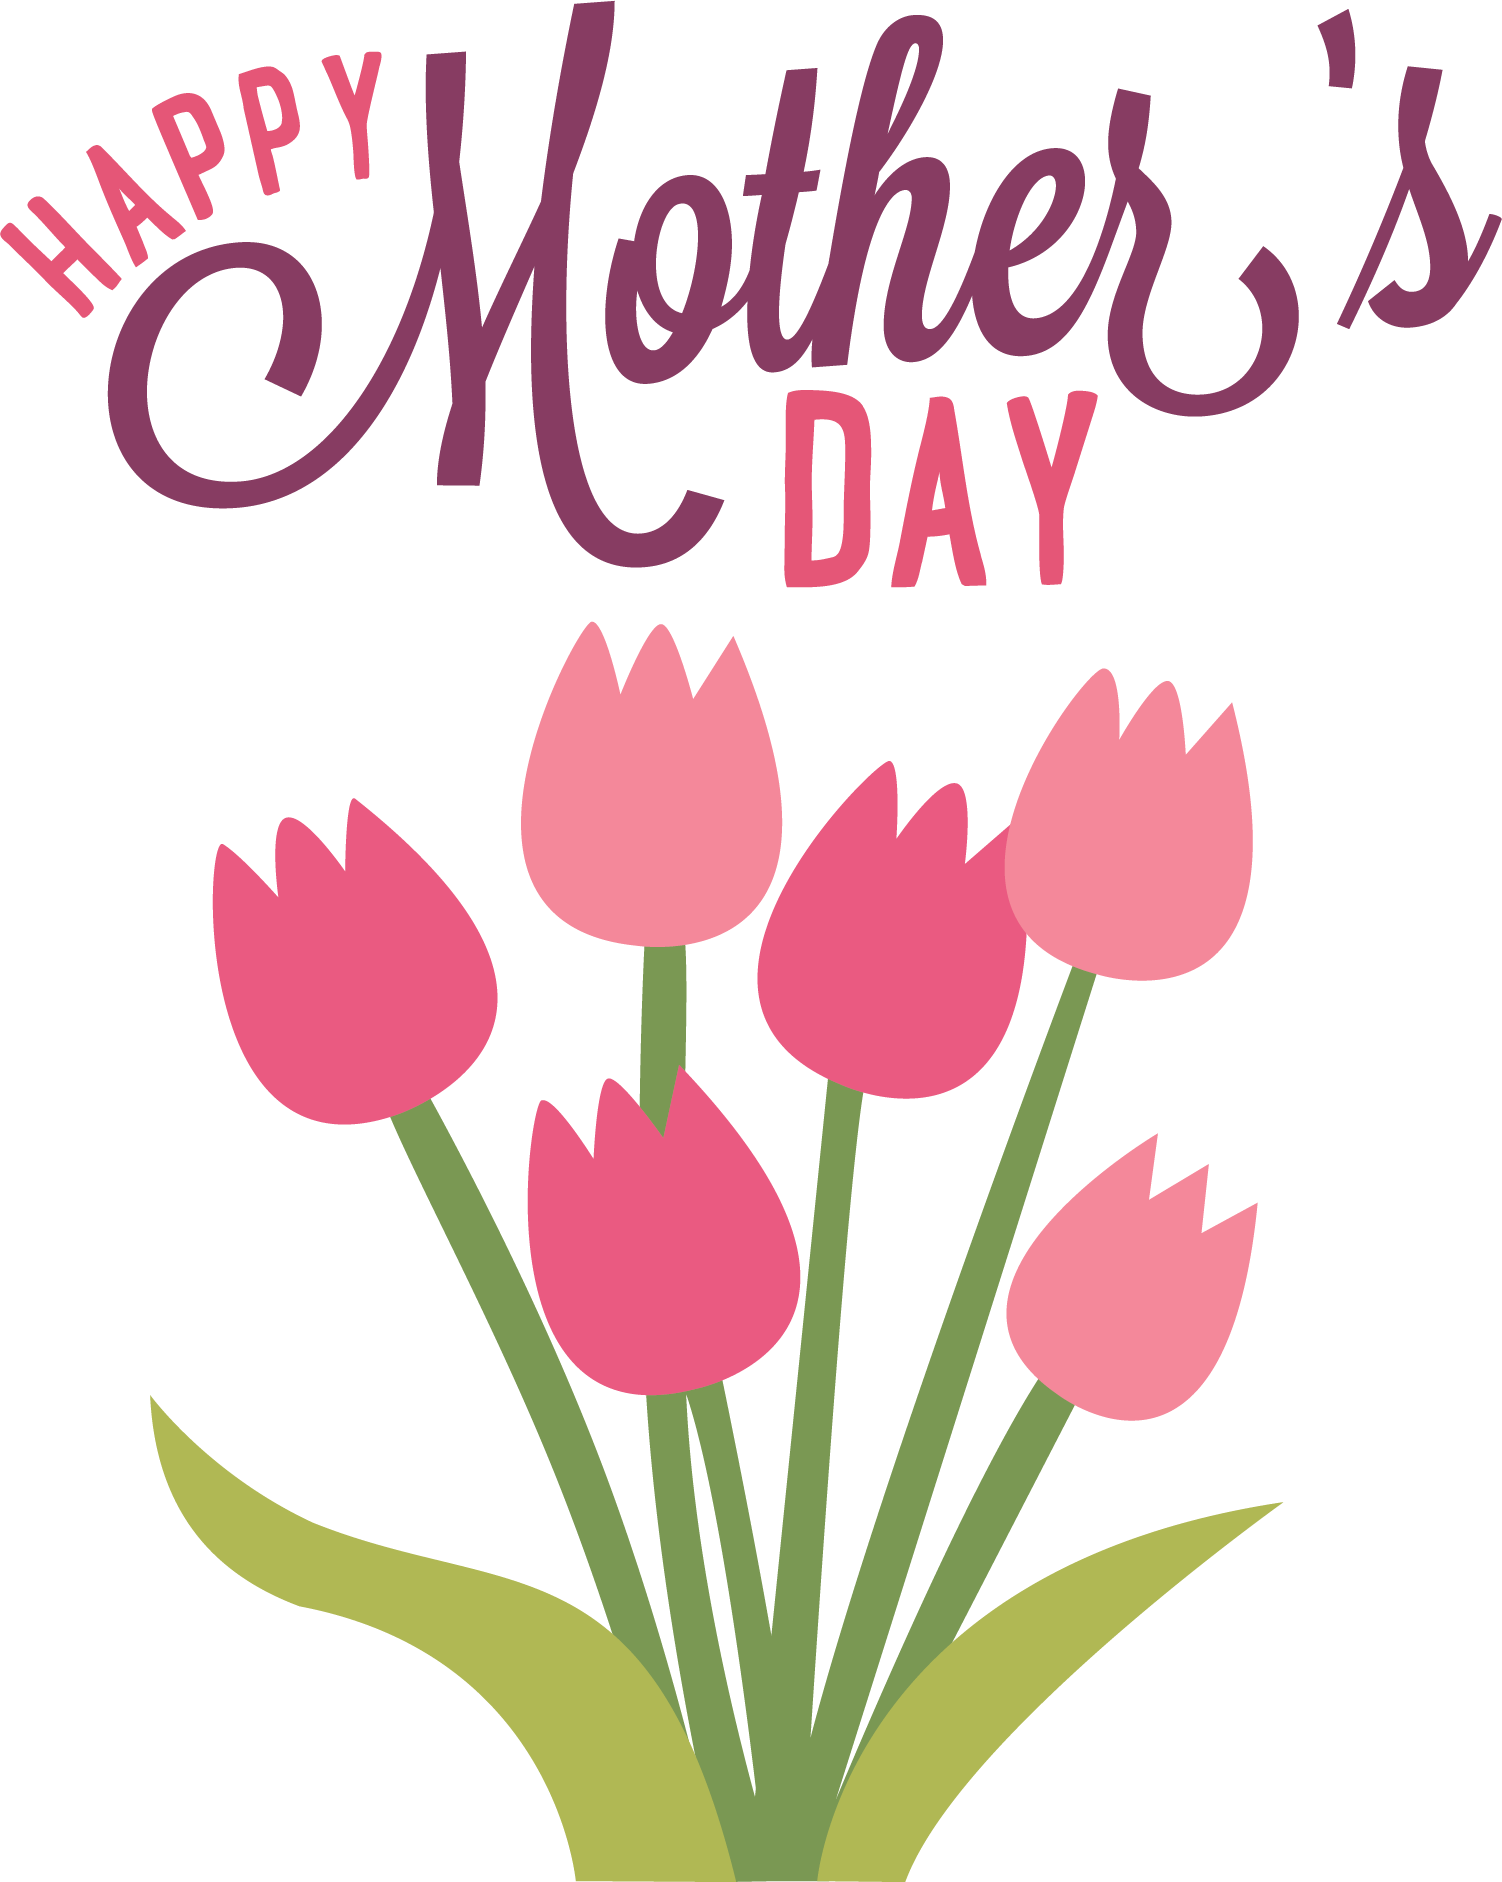 Mother day incep imagine. Coat clipart j word